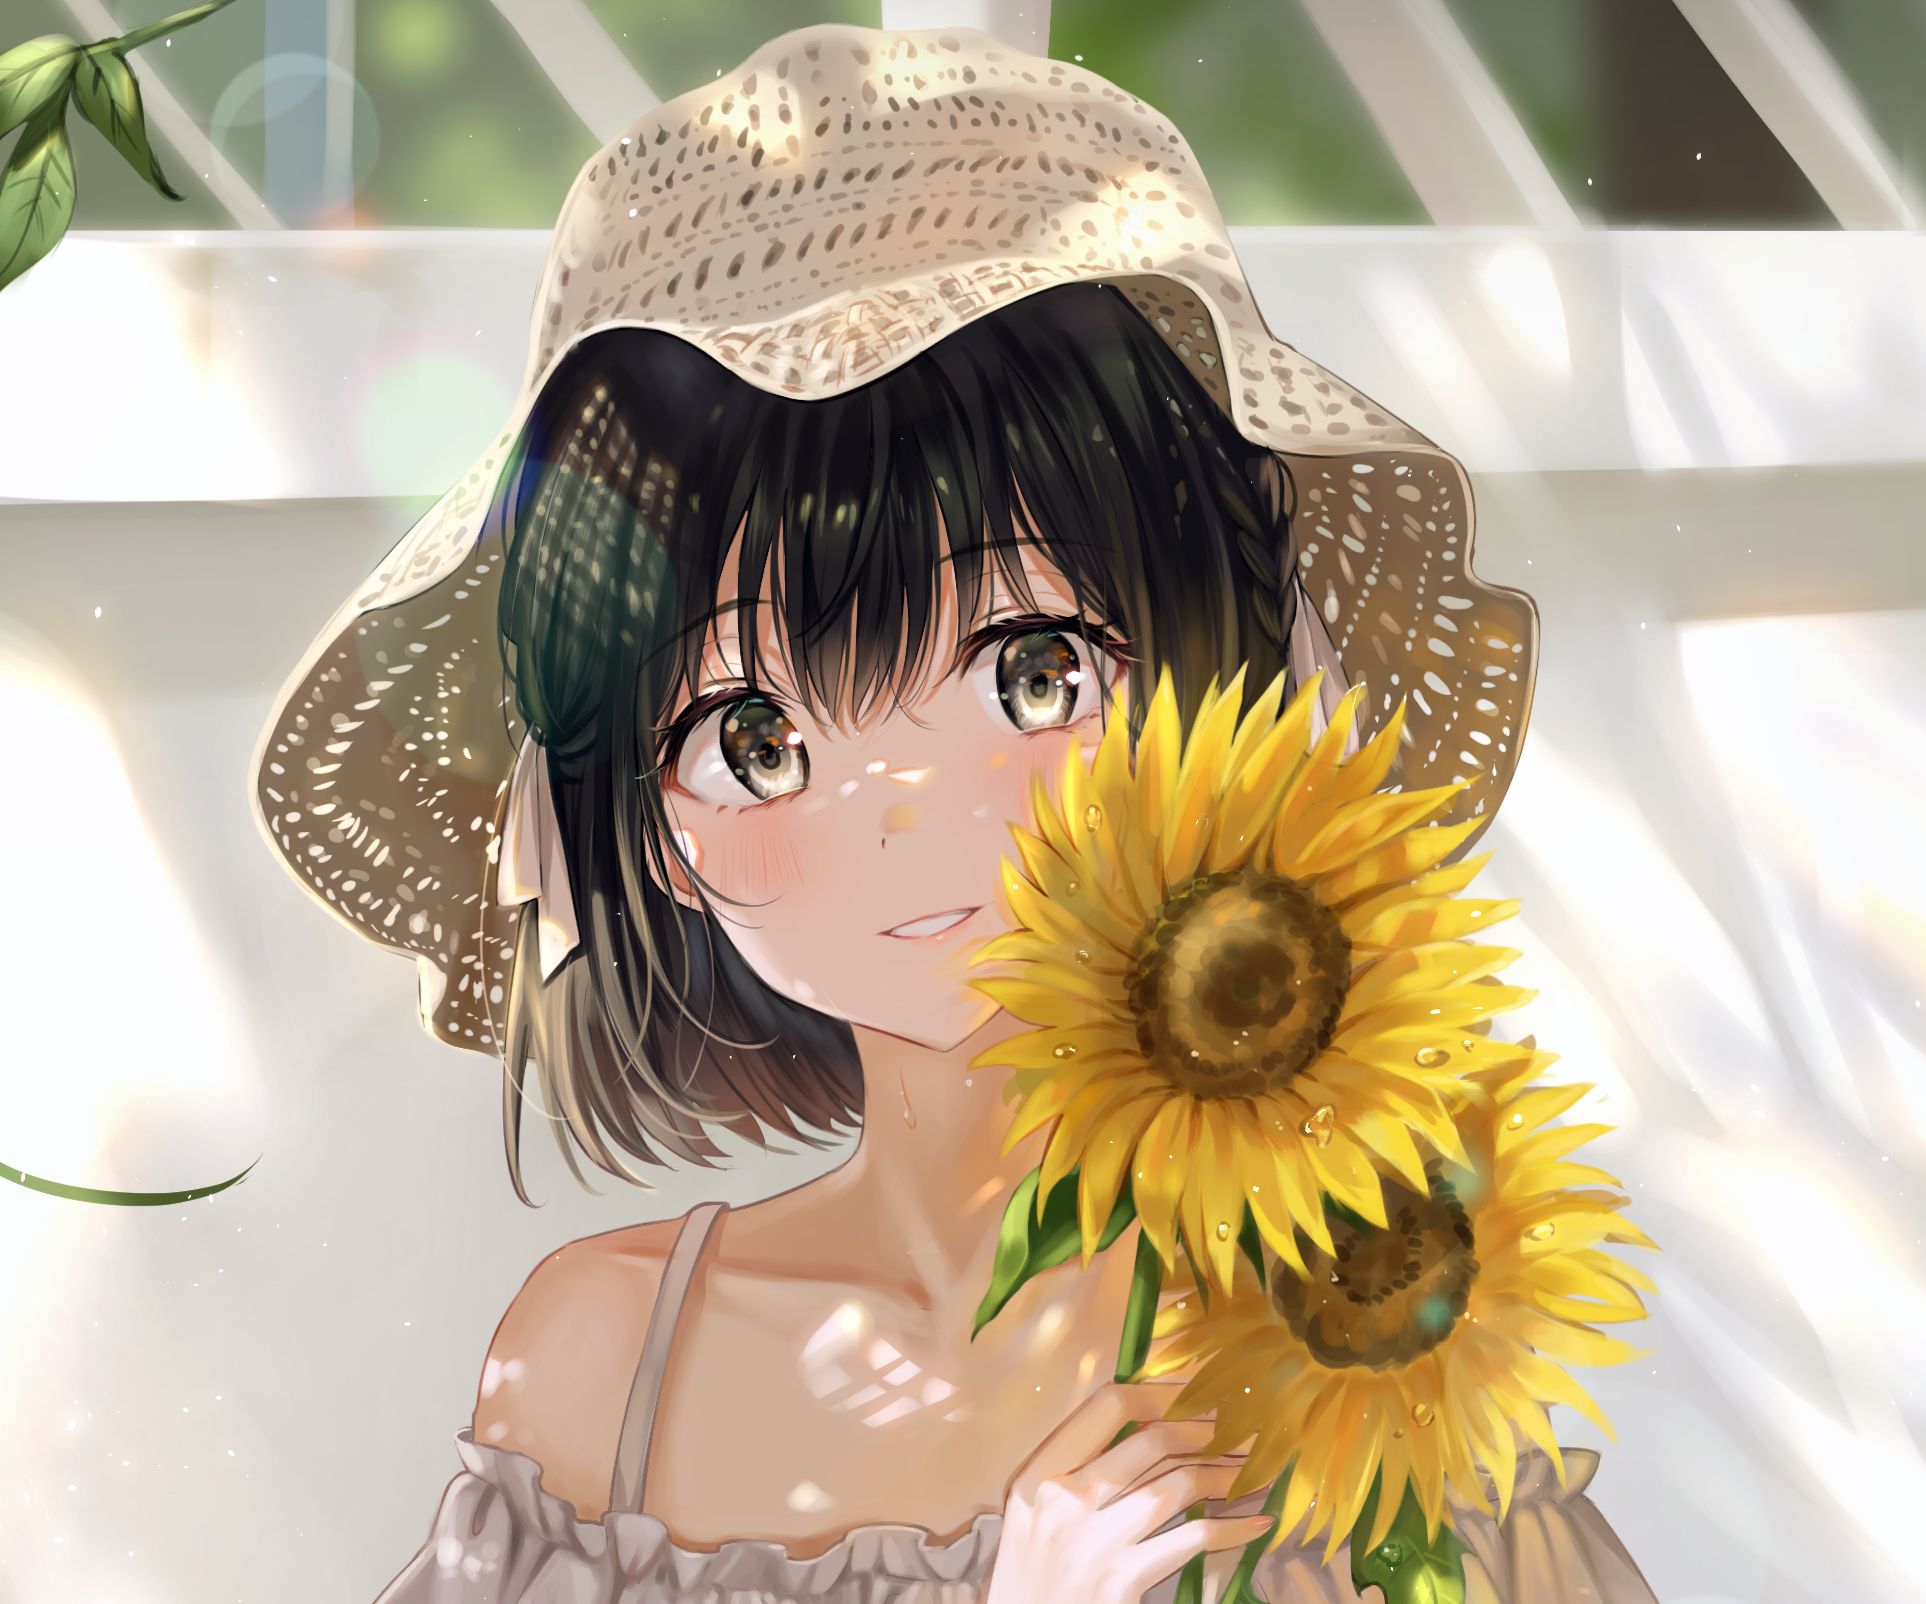 Cute Anime Girl in a Hat on a Background of Sunflowers and Sky, Anime Girl  - valleyresorts.co.uk